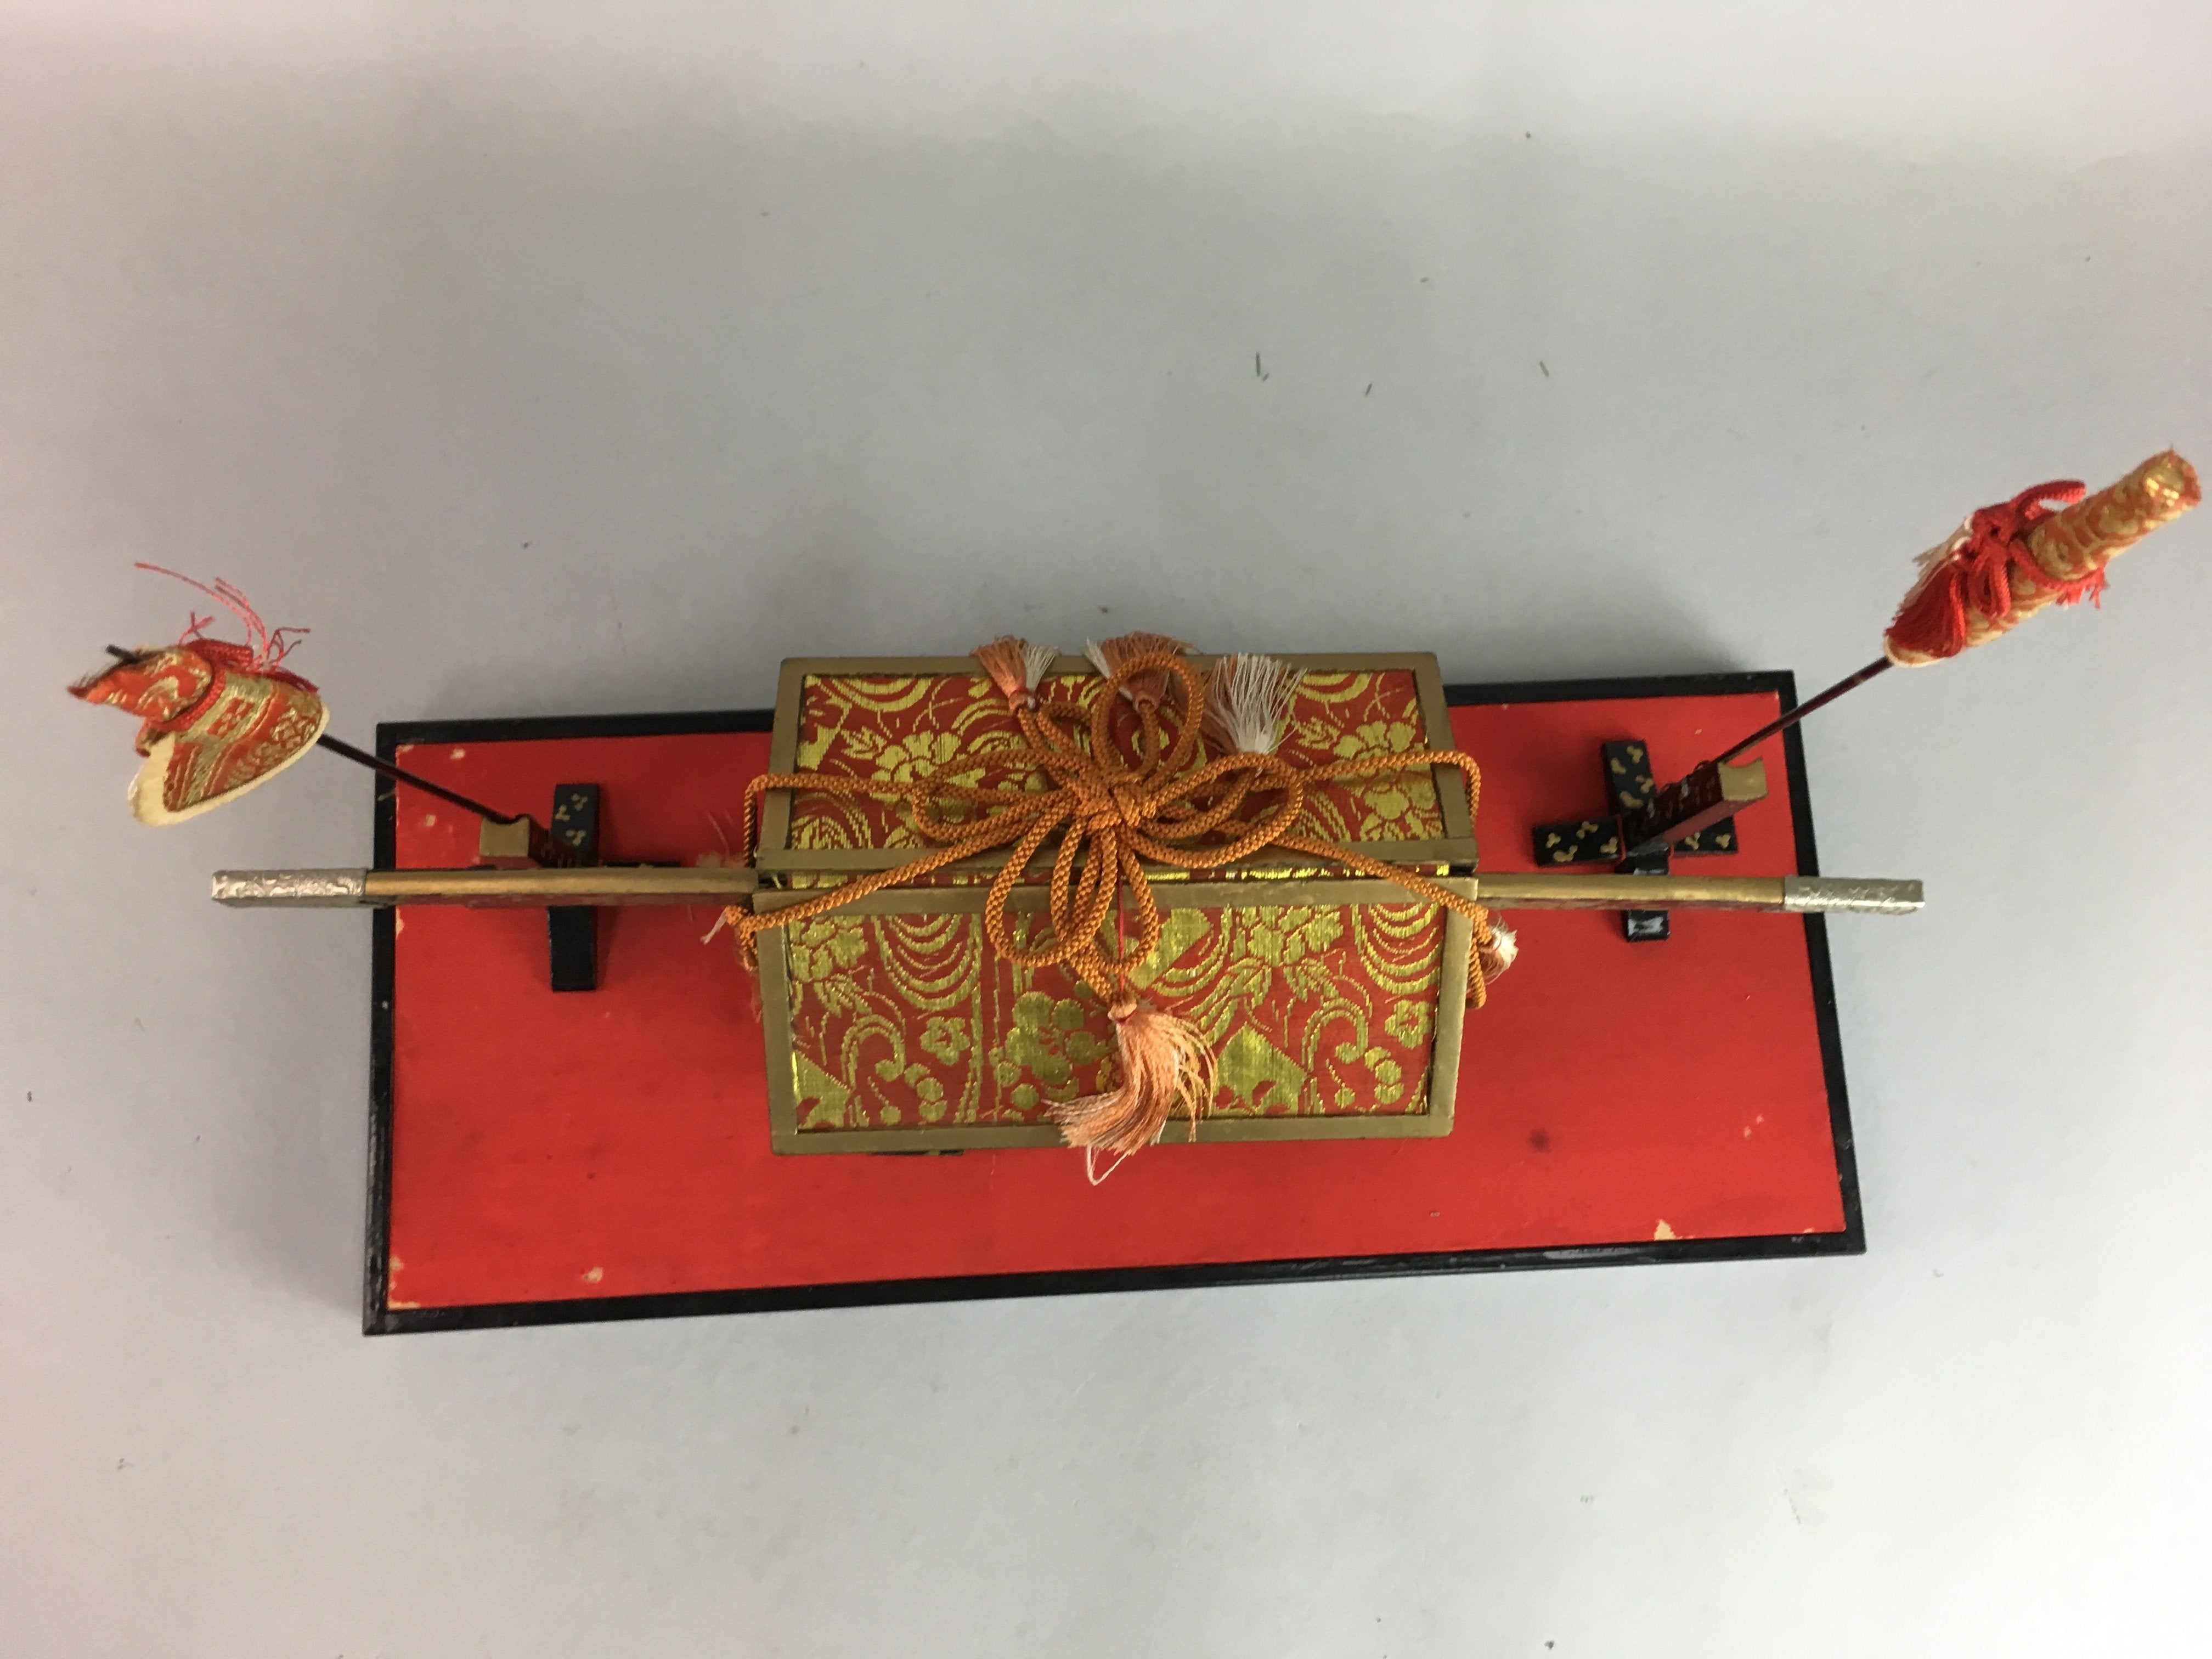 Japanese Hina Doll Lacquer Carriage Stand Palanquin Girls Day Decoration ID221